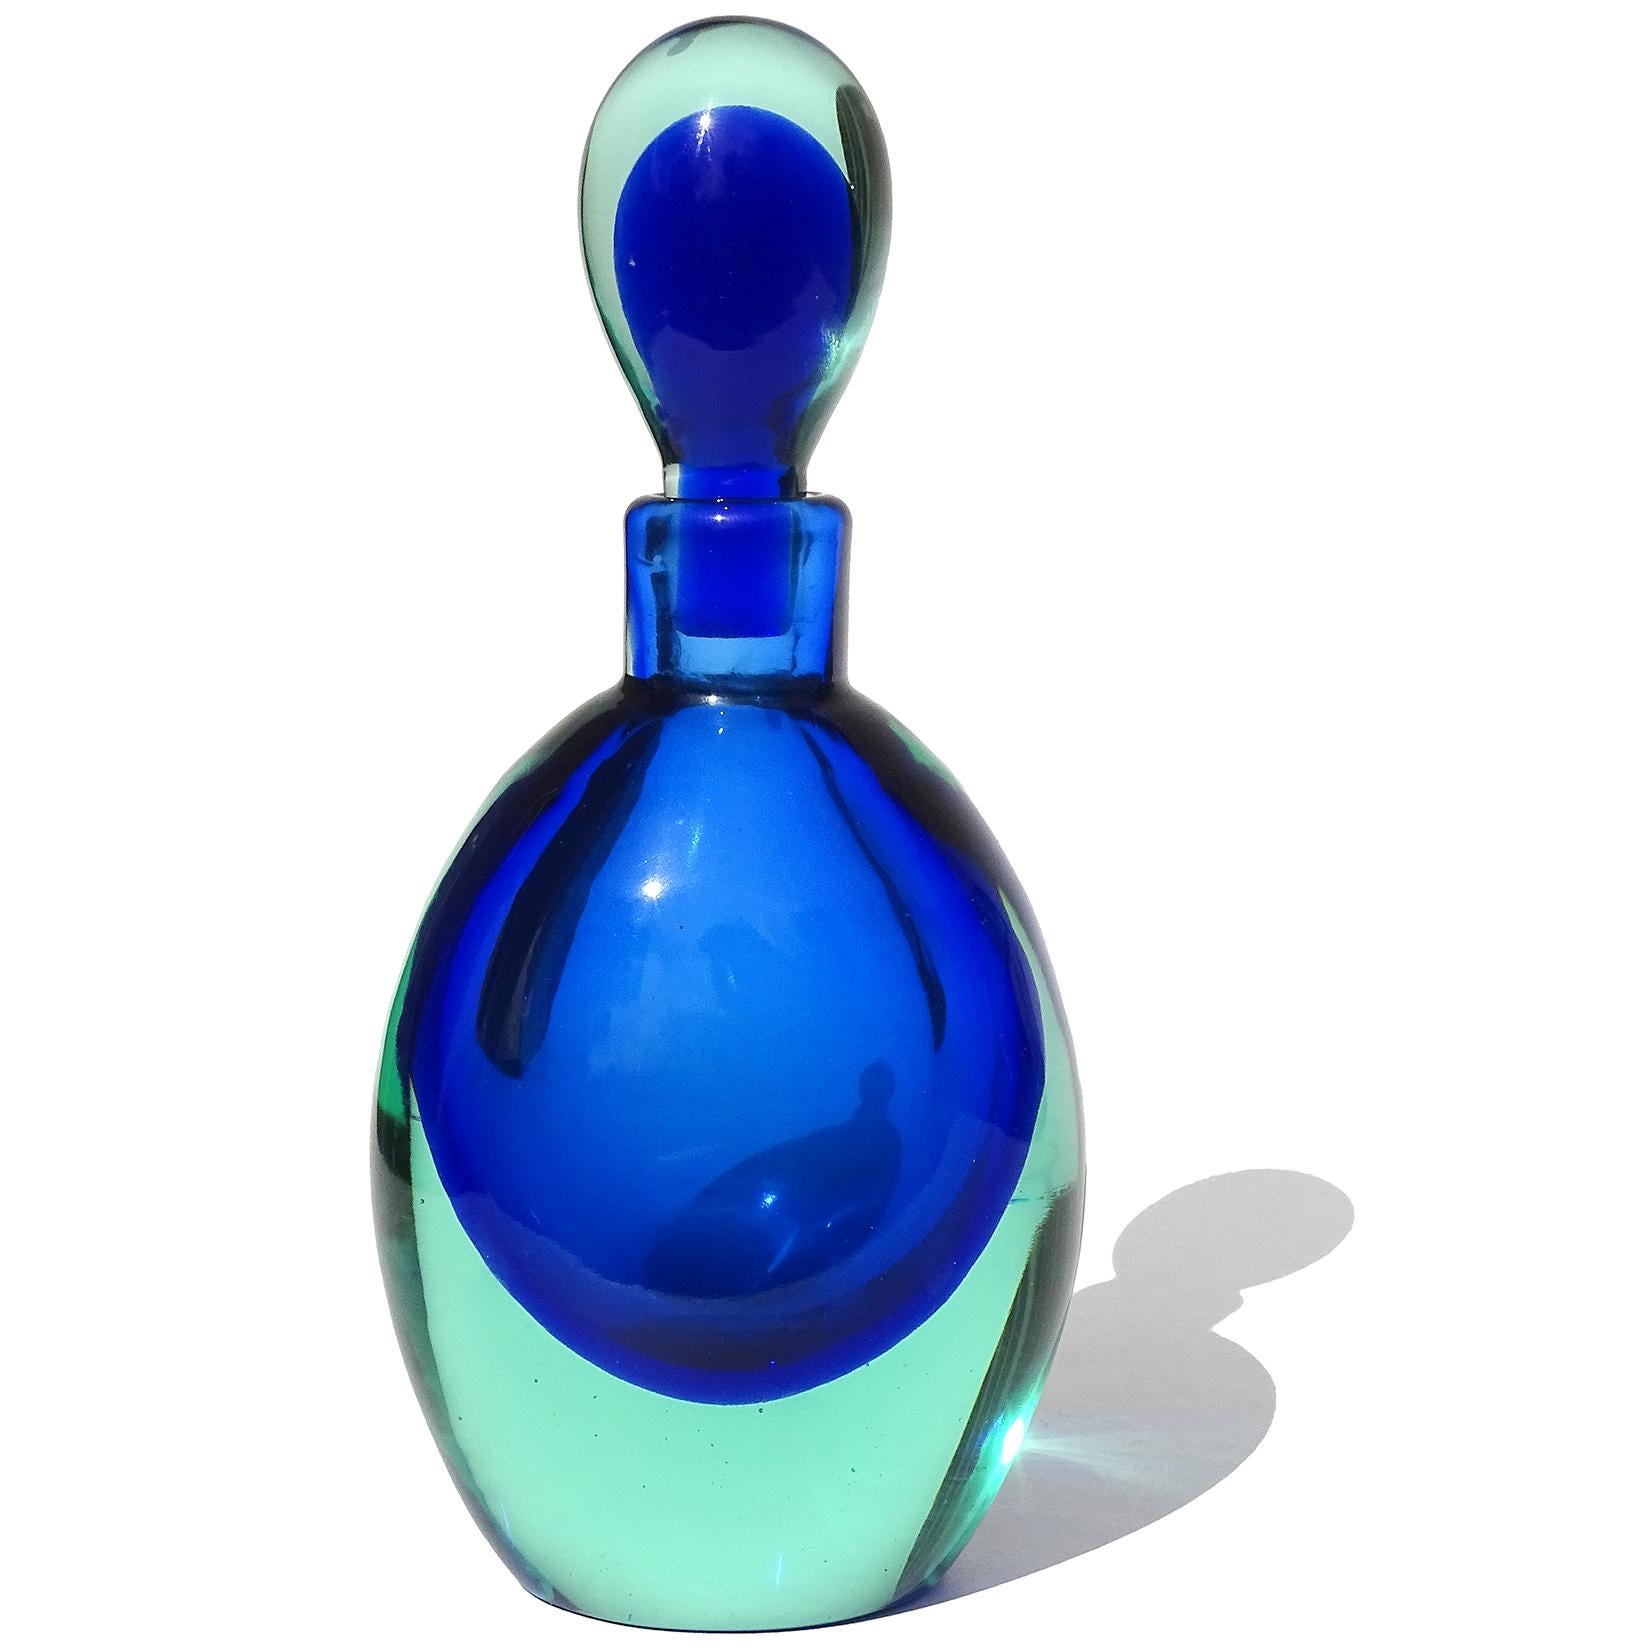 Beautiful vintage Murano hand blown Sommerso cobalt blue and aqua Italian art glass perfume bottle. Documented to the Seguso Vetri d'Arte company. The bottle has the original stopper. It has an oval shape, thinner on the side view. The glass has a